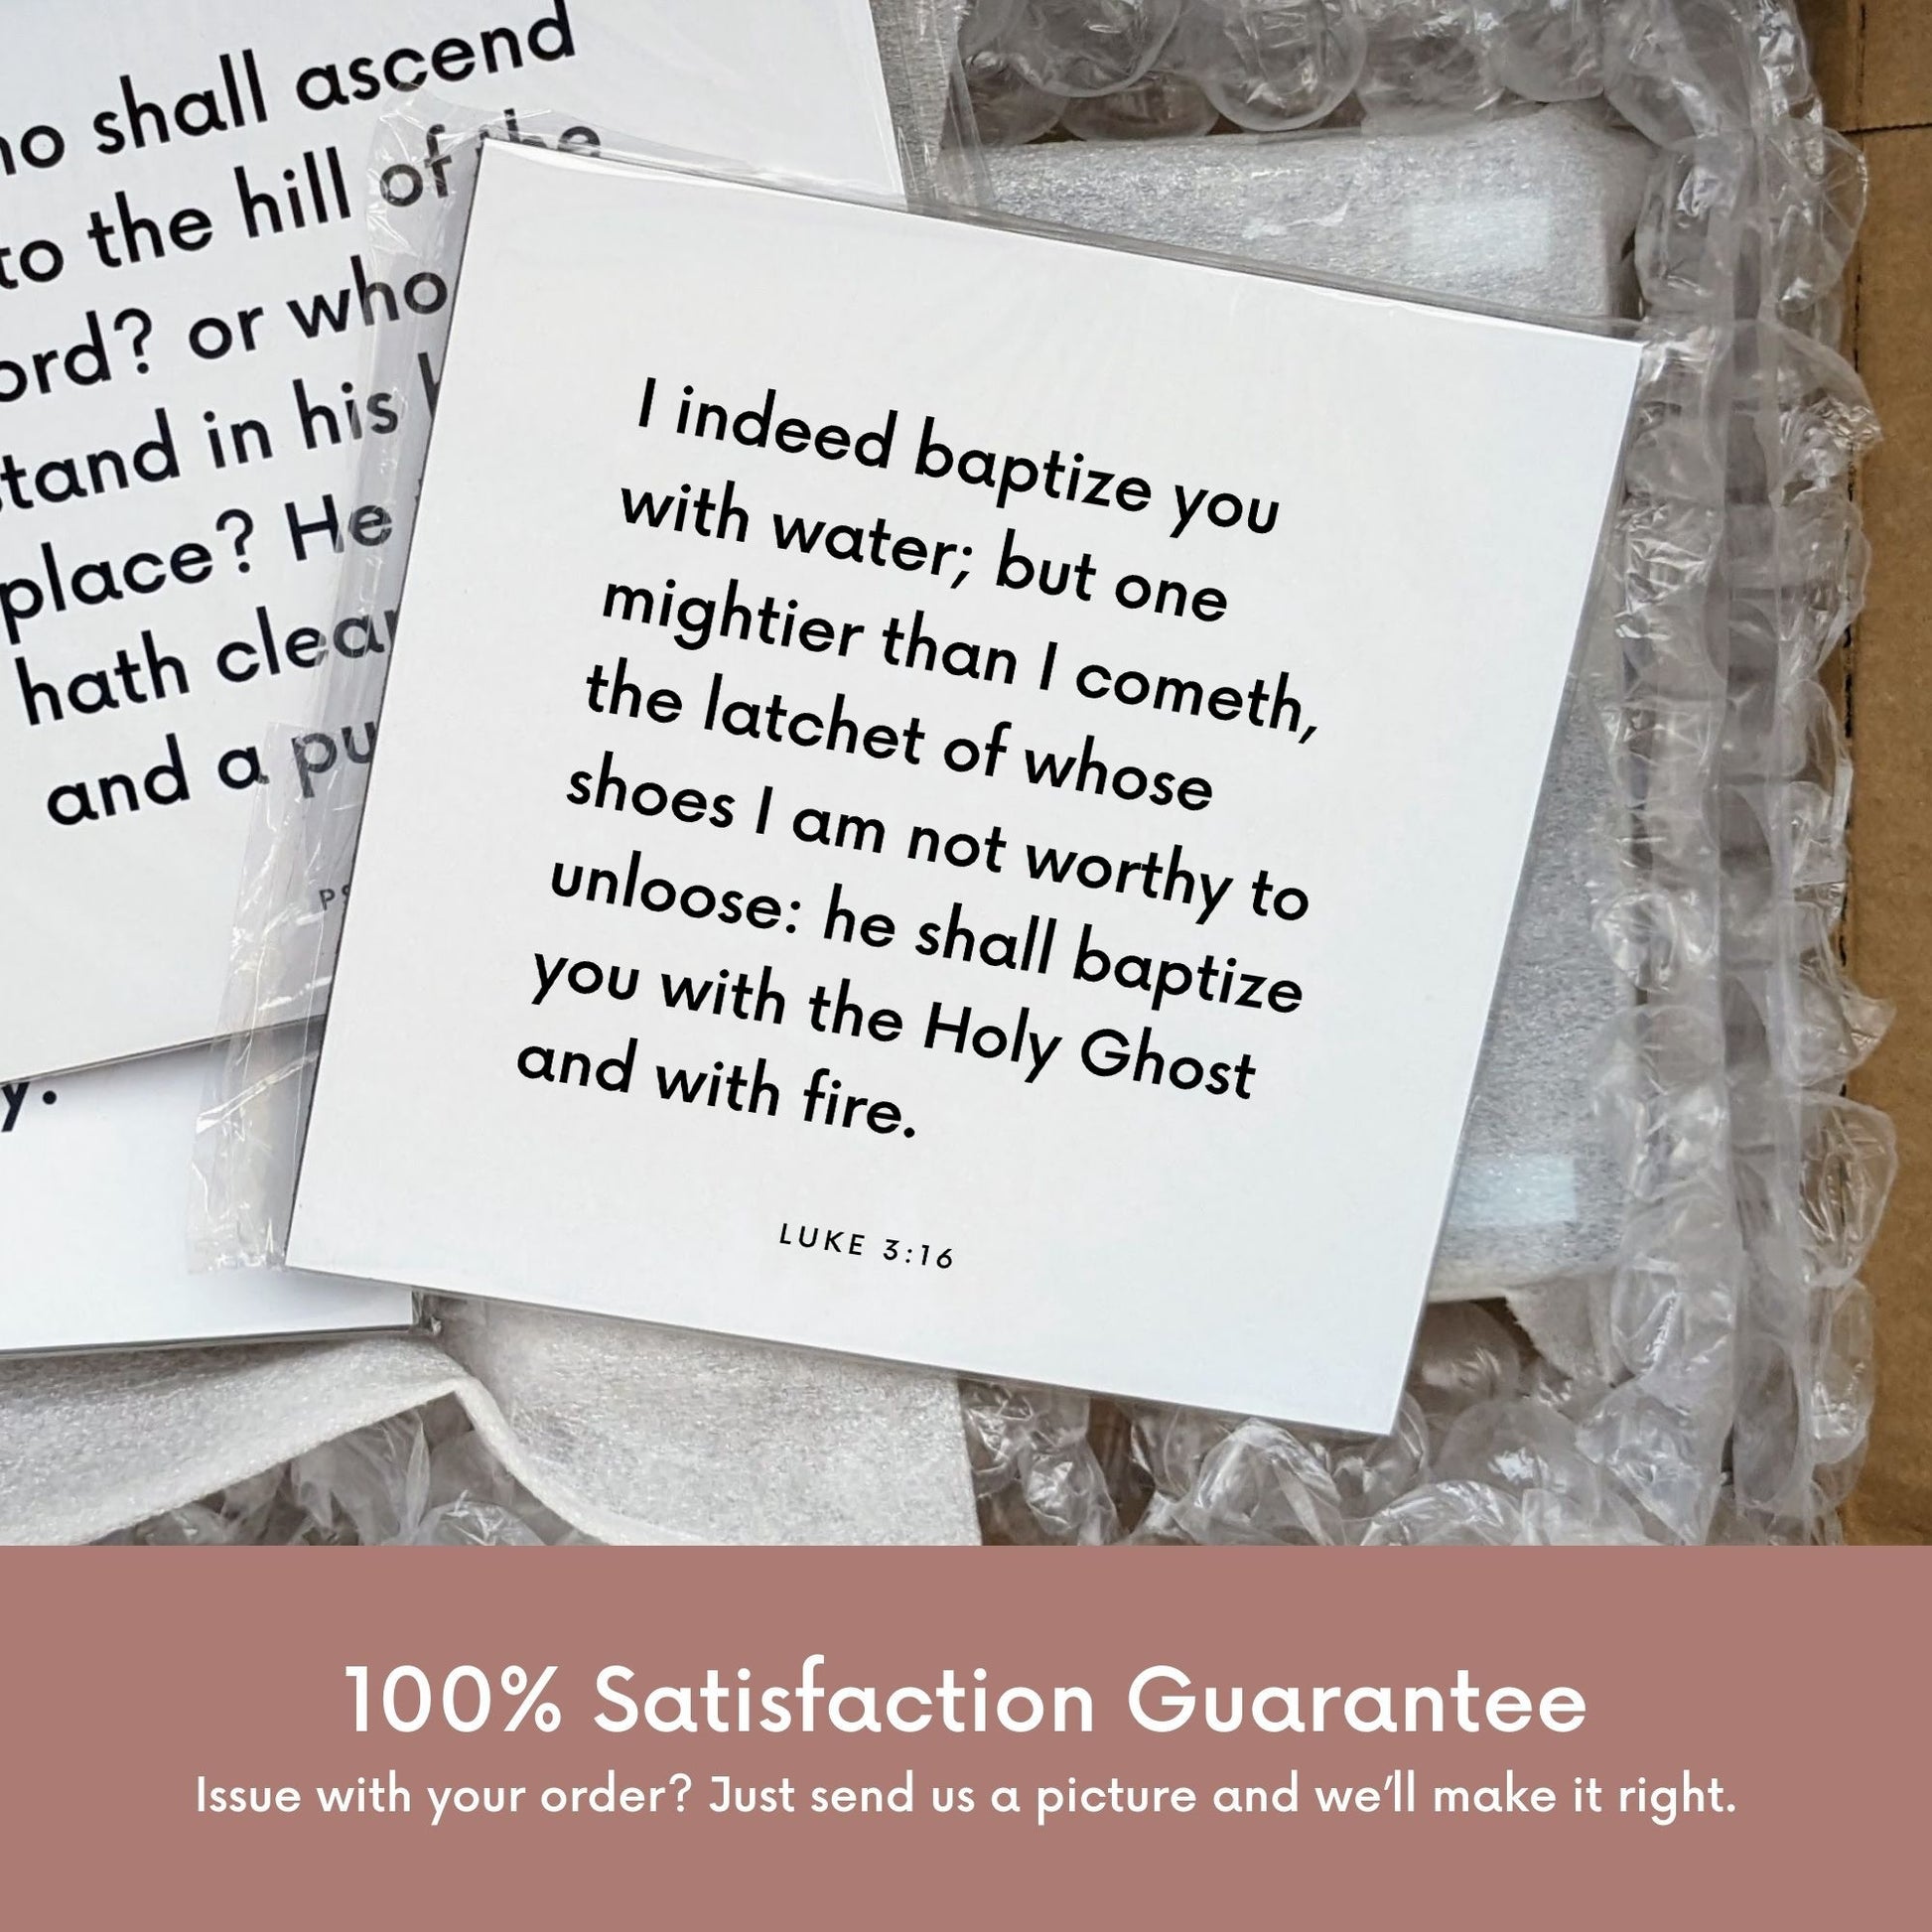 Shipping materials for scripture tile of Luke 3:16 - "Whose shoes I am not worthy to unloose"